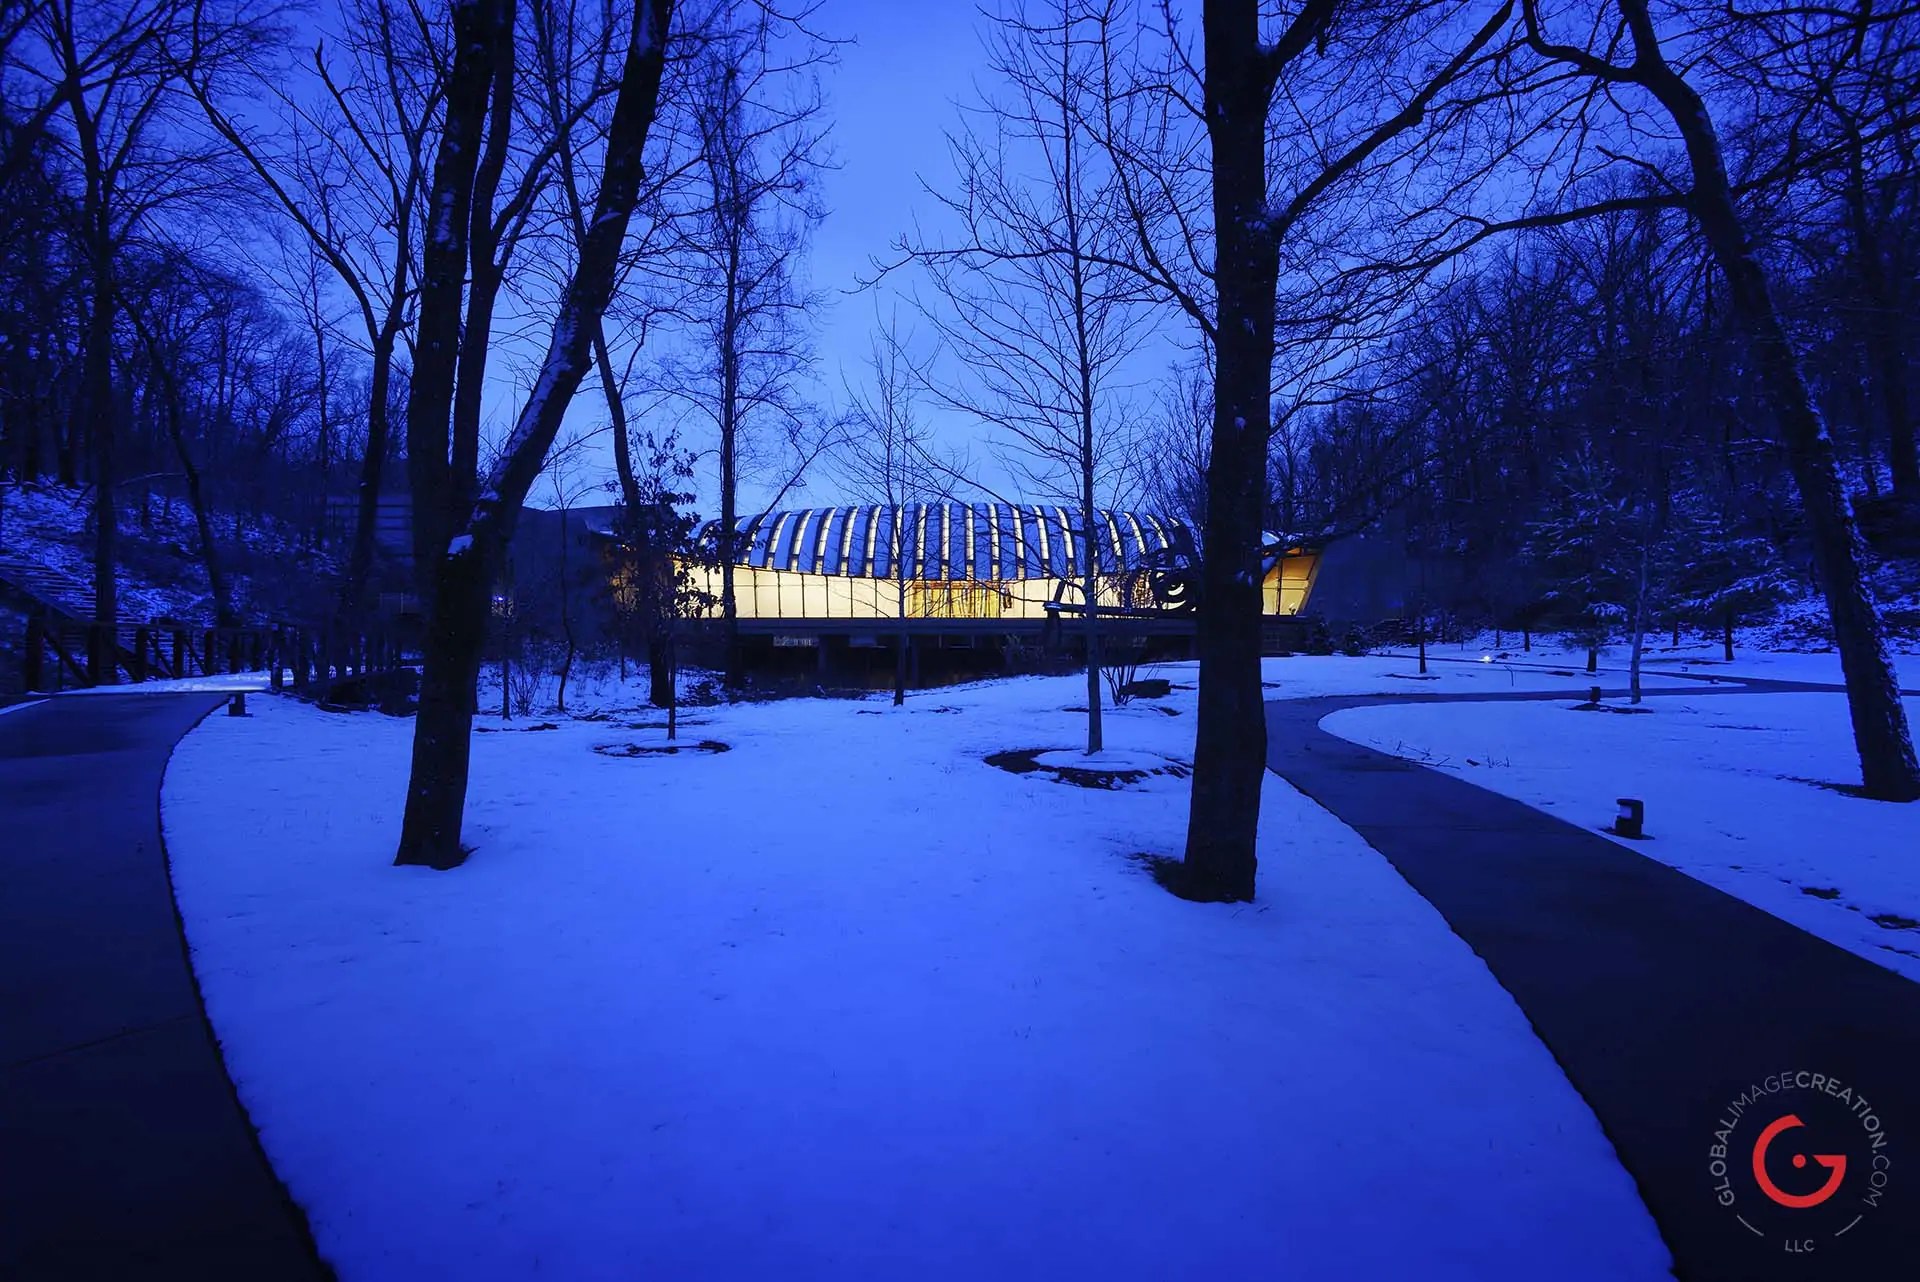 Crystal Bridges Museum, Bentonville, Arkansas in the snow - Professional Architecture Photographer and Commercial Photography of Buildings